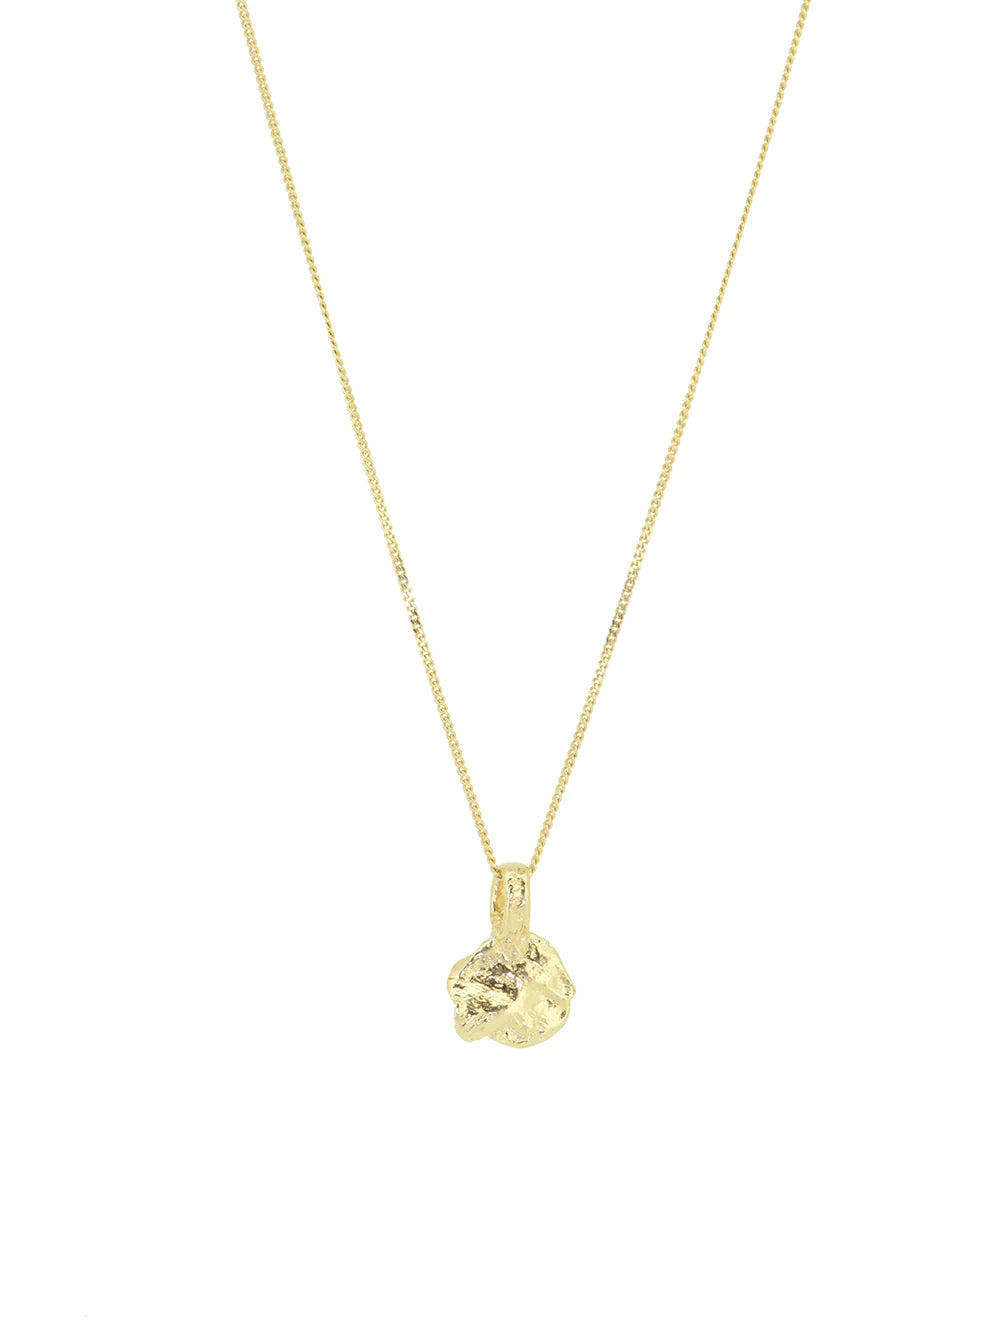 LUCK necklace GP 14K